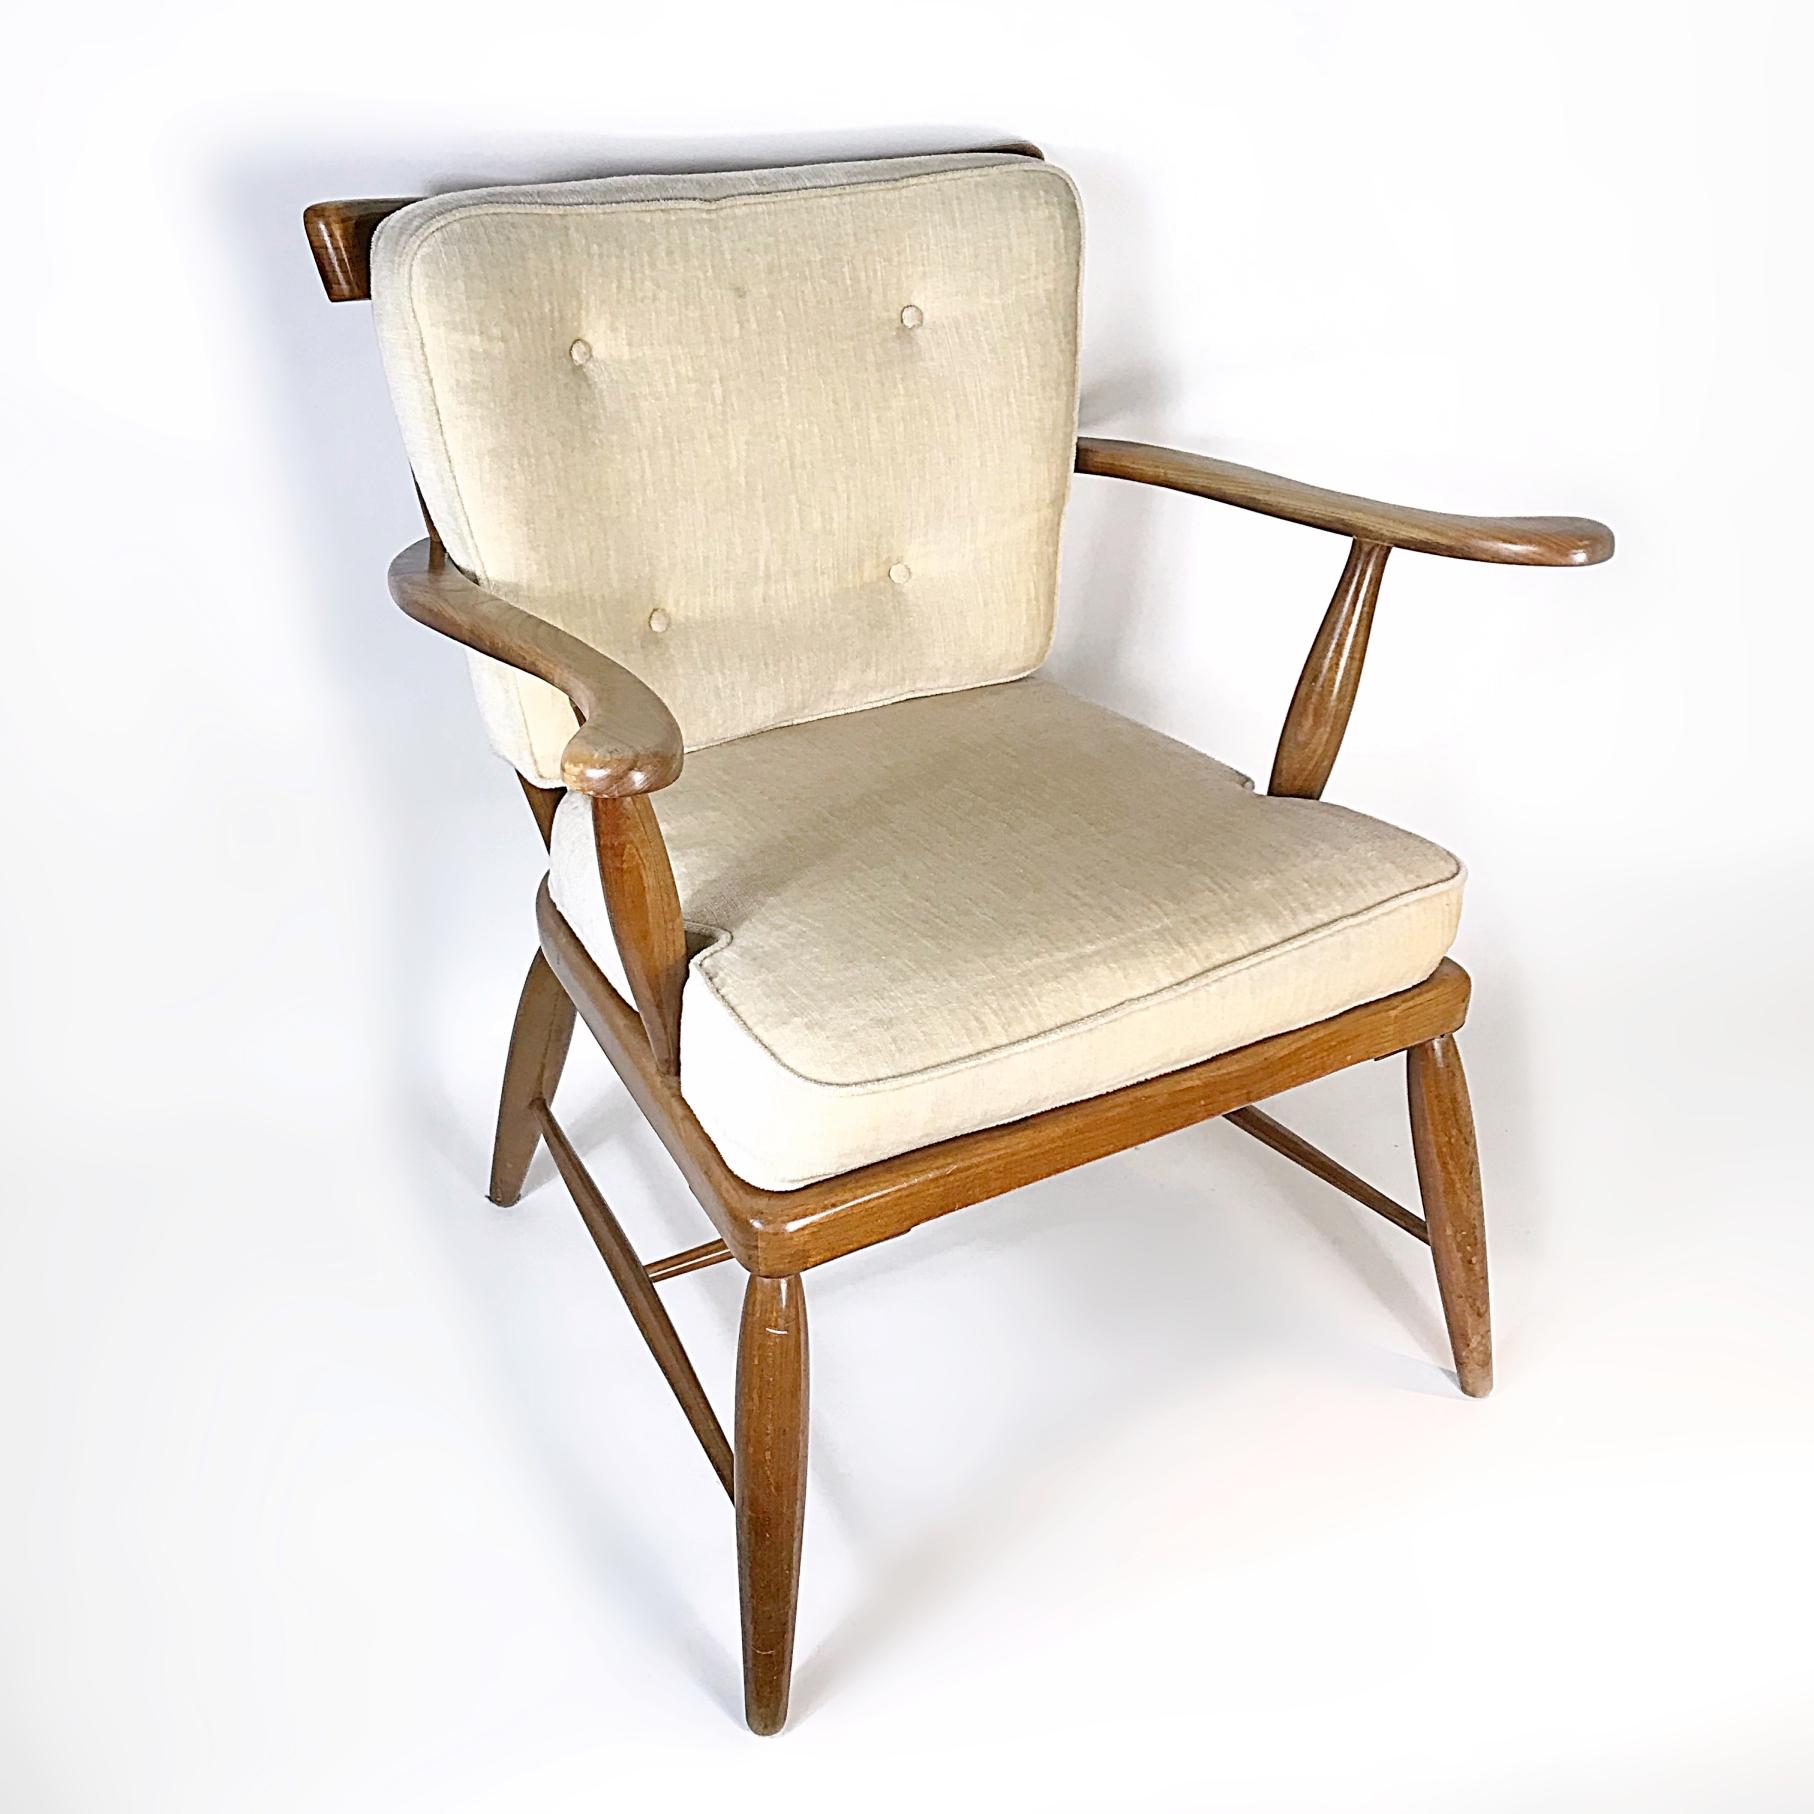 Beautiful walnut wood armchair designed by Anna-Lülja Praun in 1950s. The chair has a solid walnut wood frame with original cushions. The chair is in a very good original condition with minor wear due to age and usage. Very comfortable